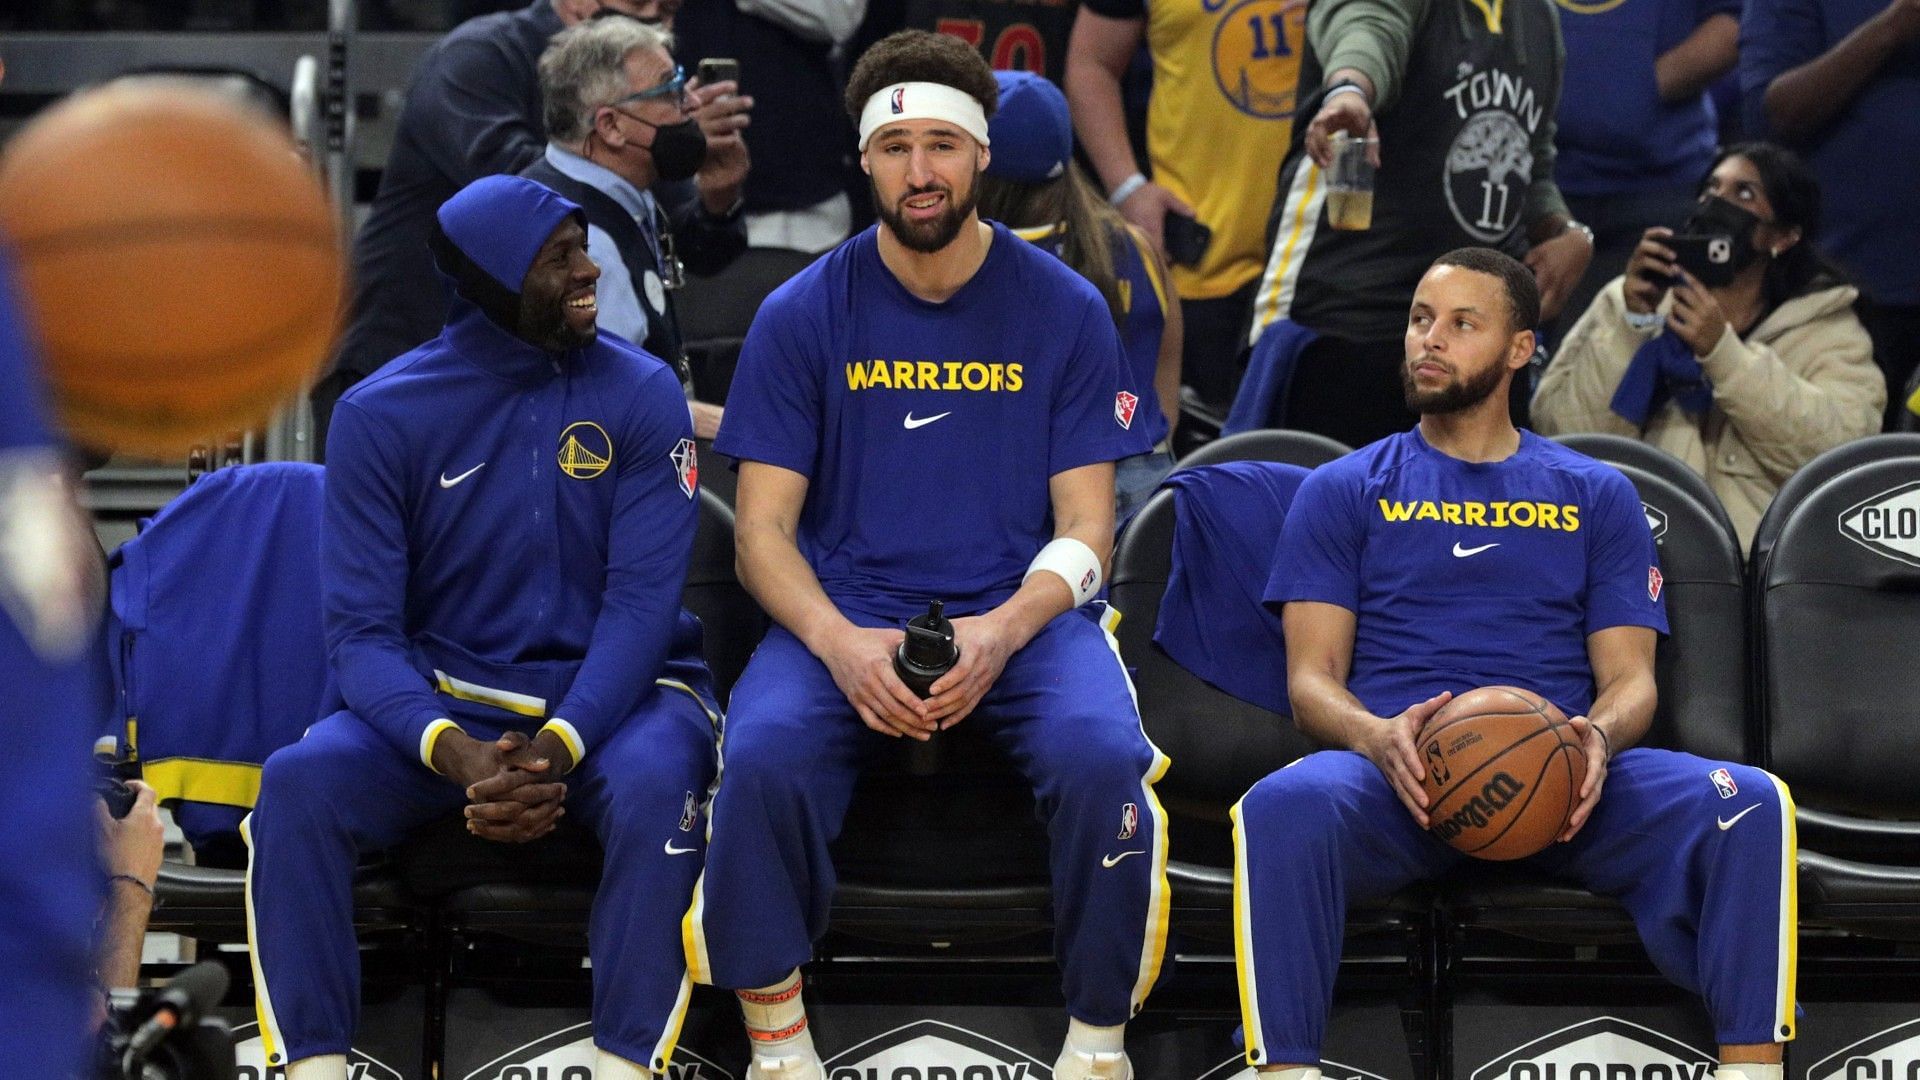 The Golden State Warriors, without Steph Curry, Klay Thompson and Draymond Green, stunned the Miami Heat last night. [Photo: Sporting News]